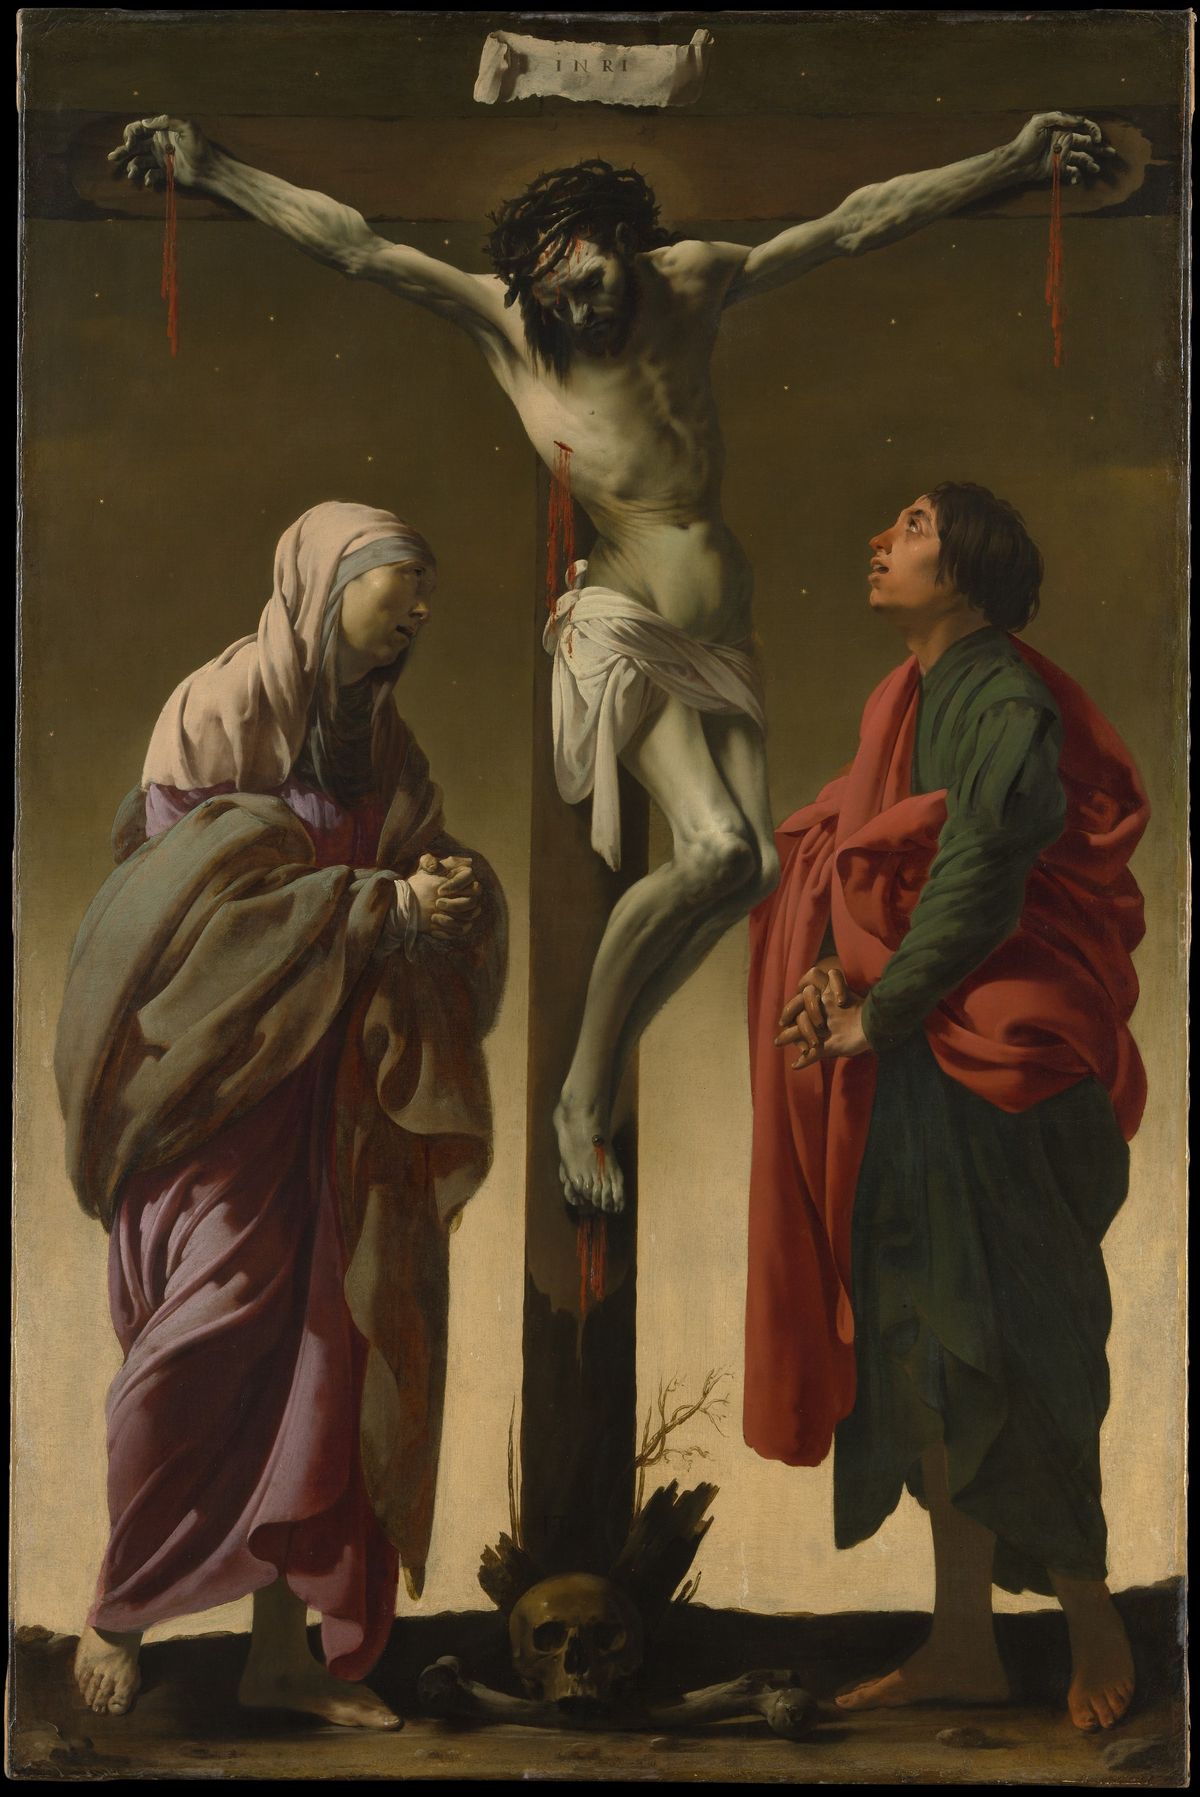 The Crucifixion with the Virgin and Saint John (1624–1625) by Hendrick ter Brugghen - Public Domain Bible Painting